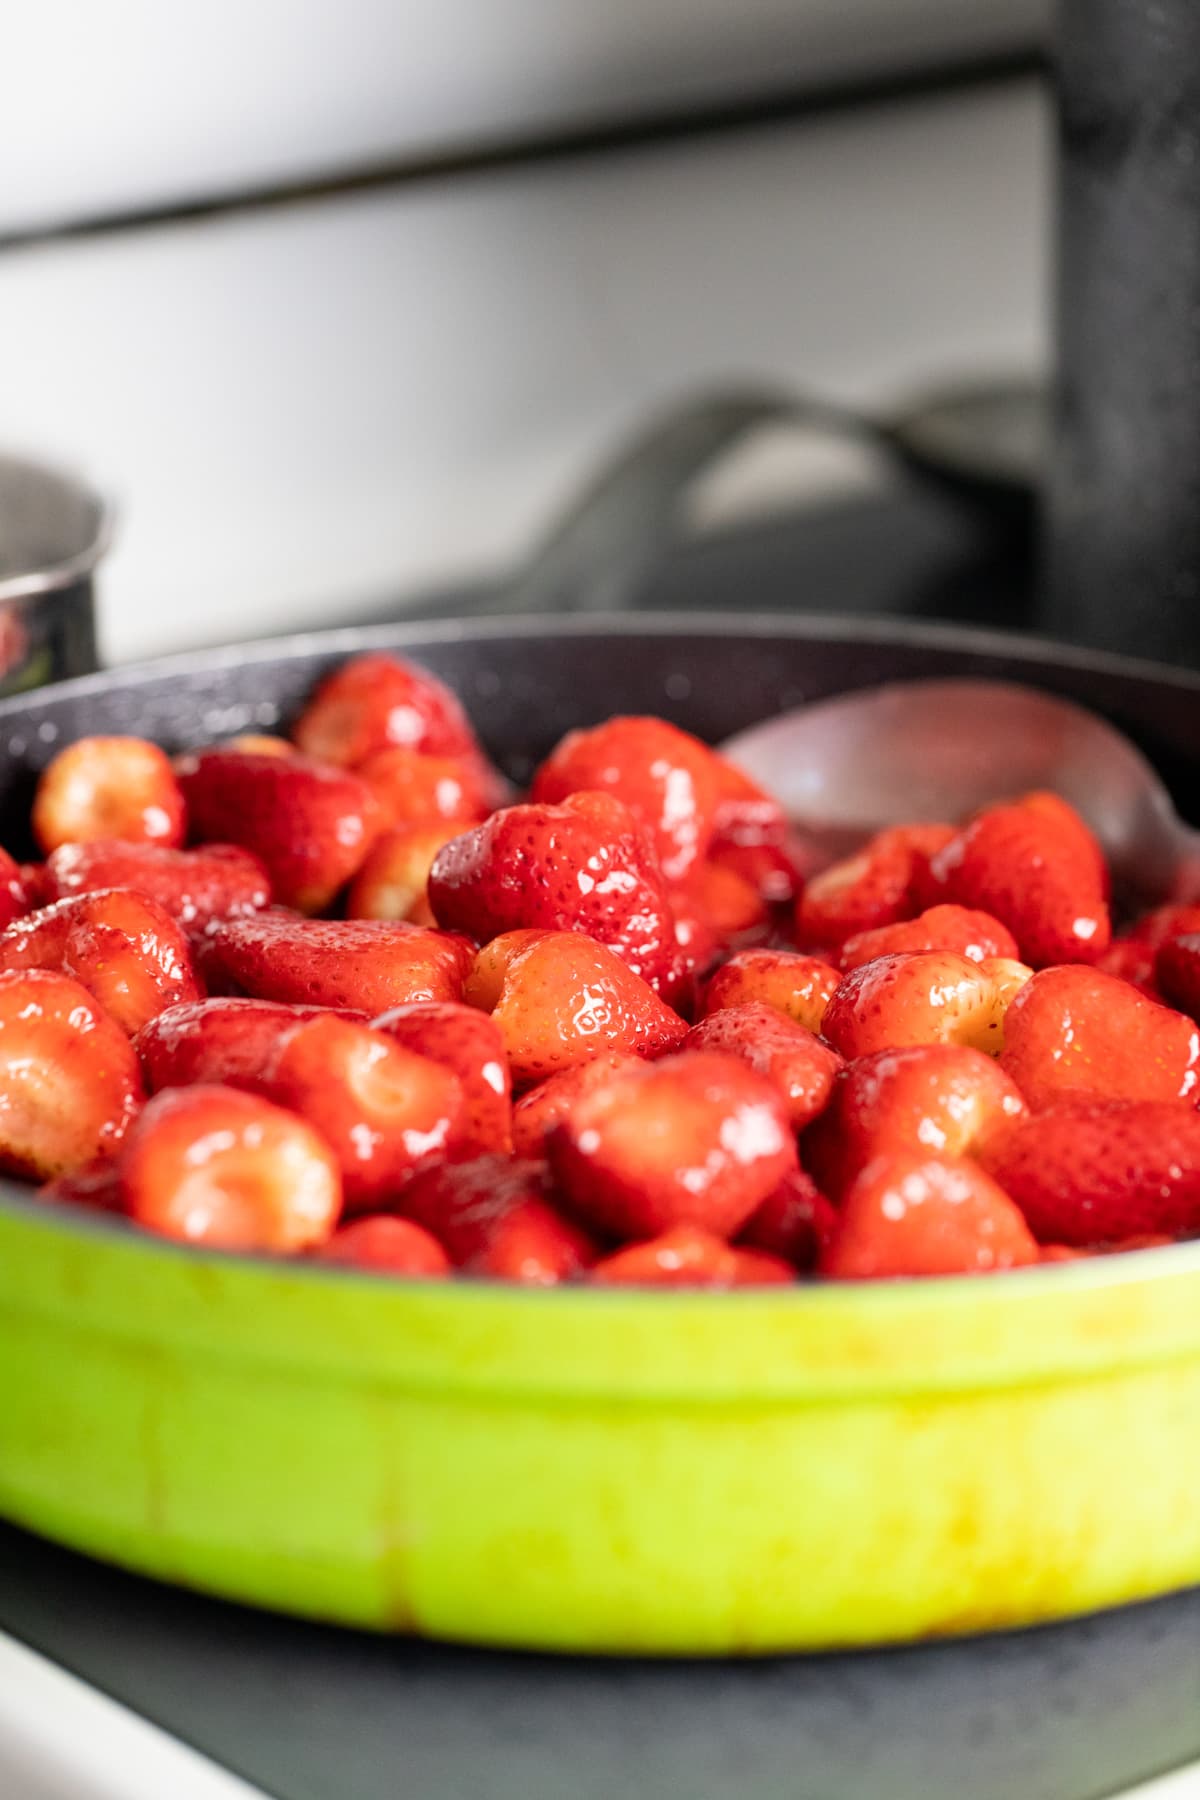 cooking the strawberries